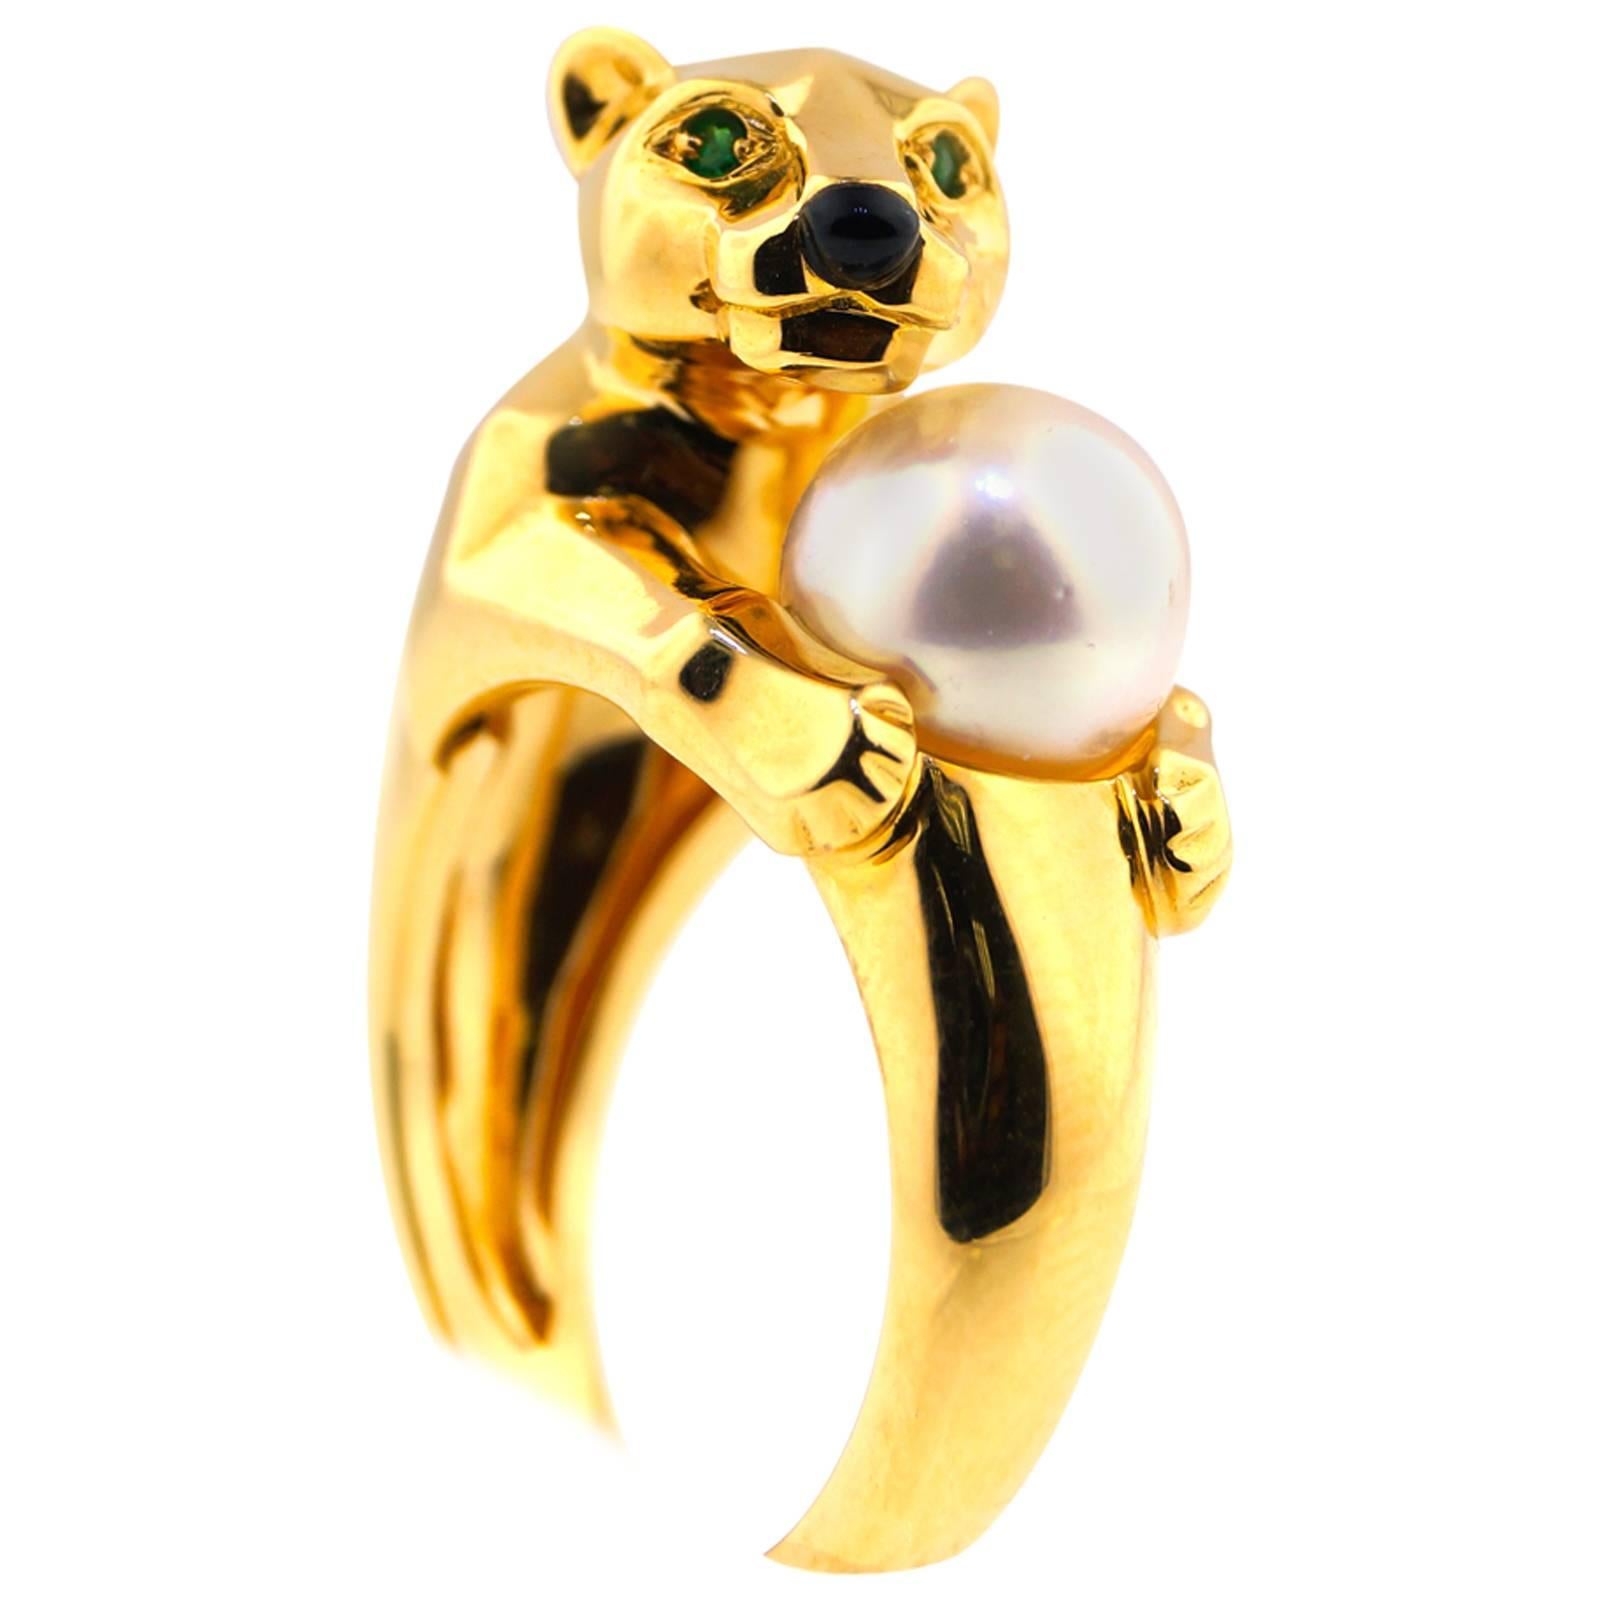  Cartier Black Onyx Pearl Garnet Gold "Panthere" Ring